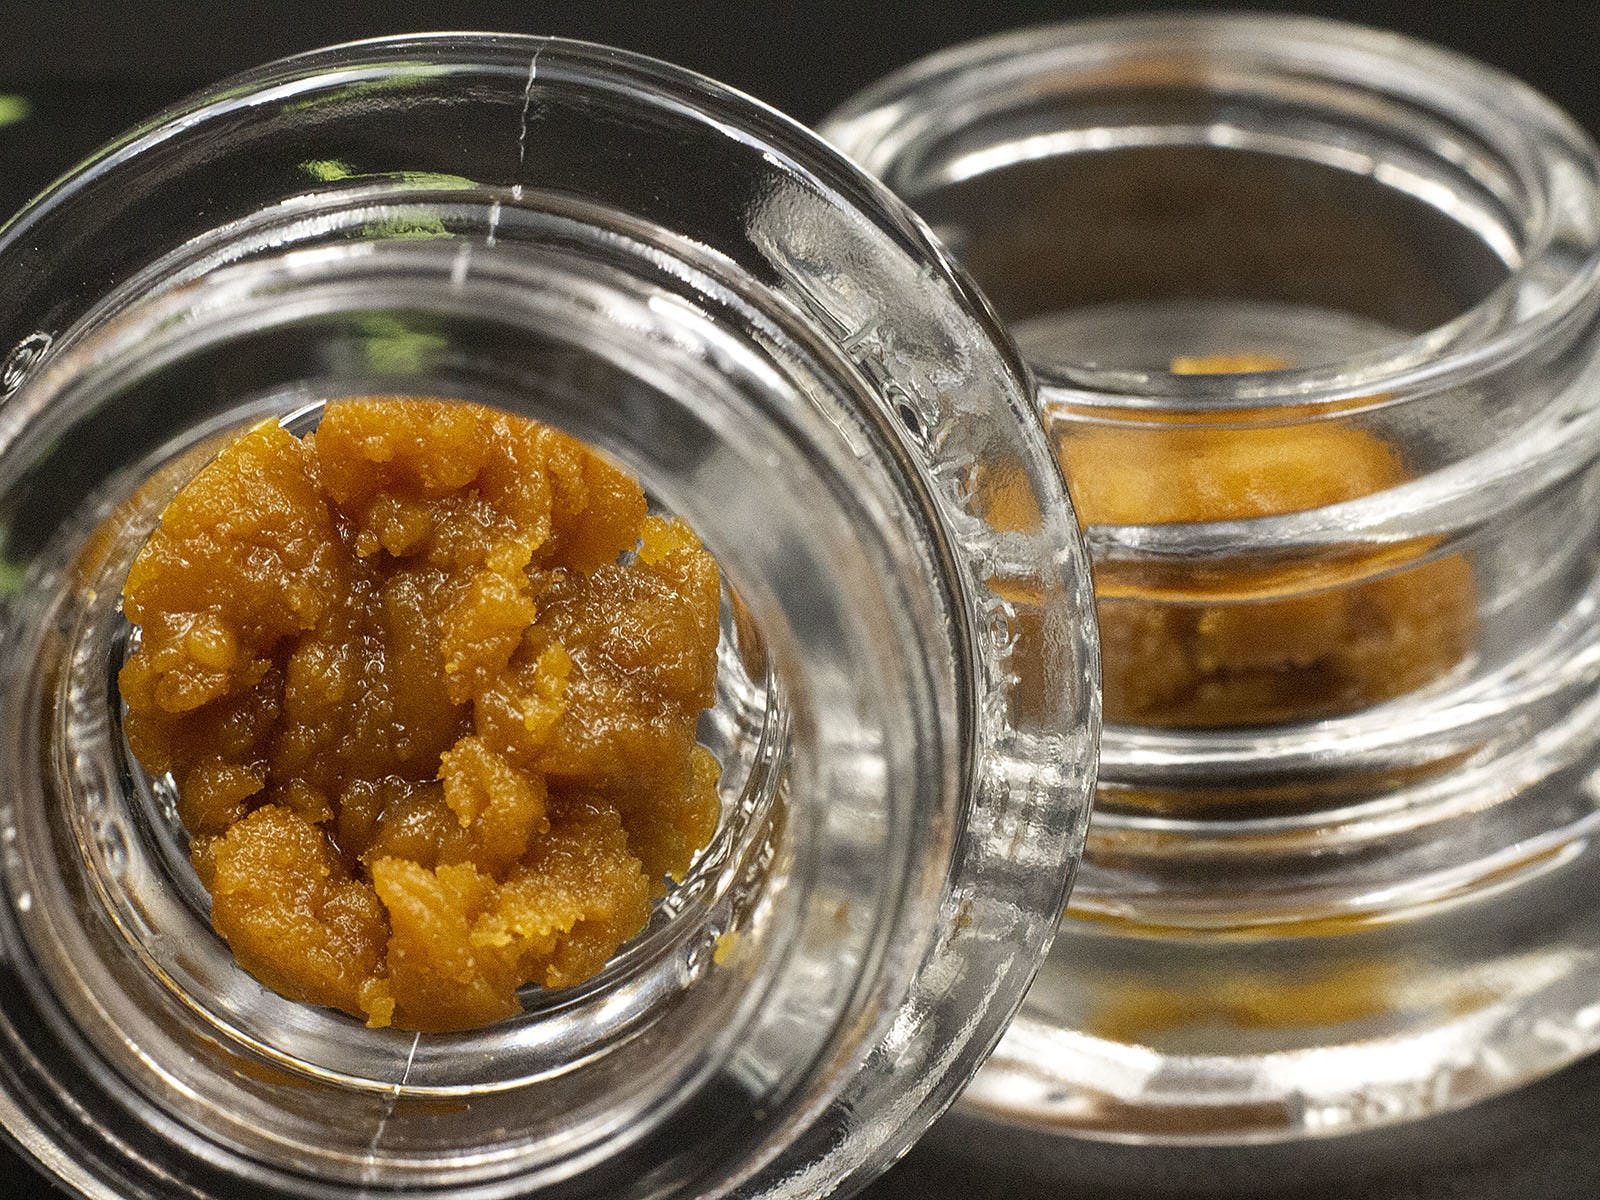 concentrate-1g-wax-peppermint-kush